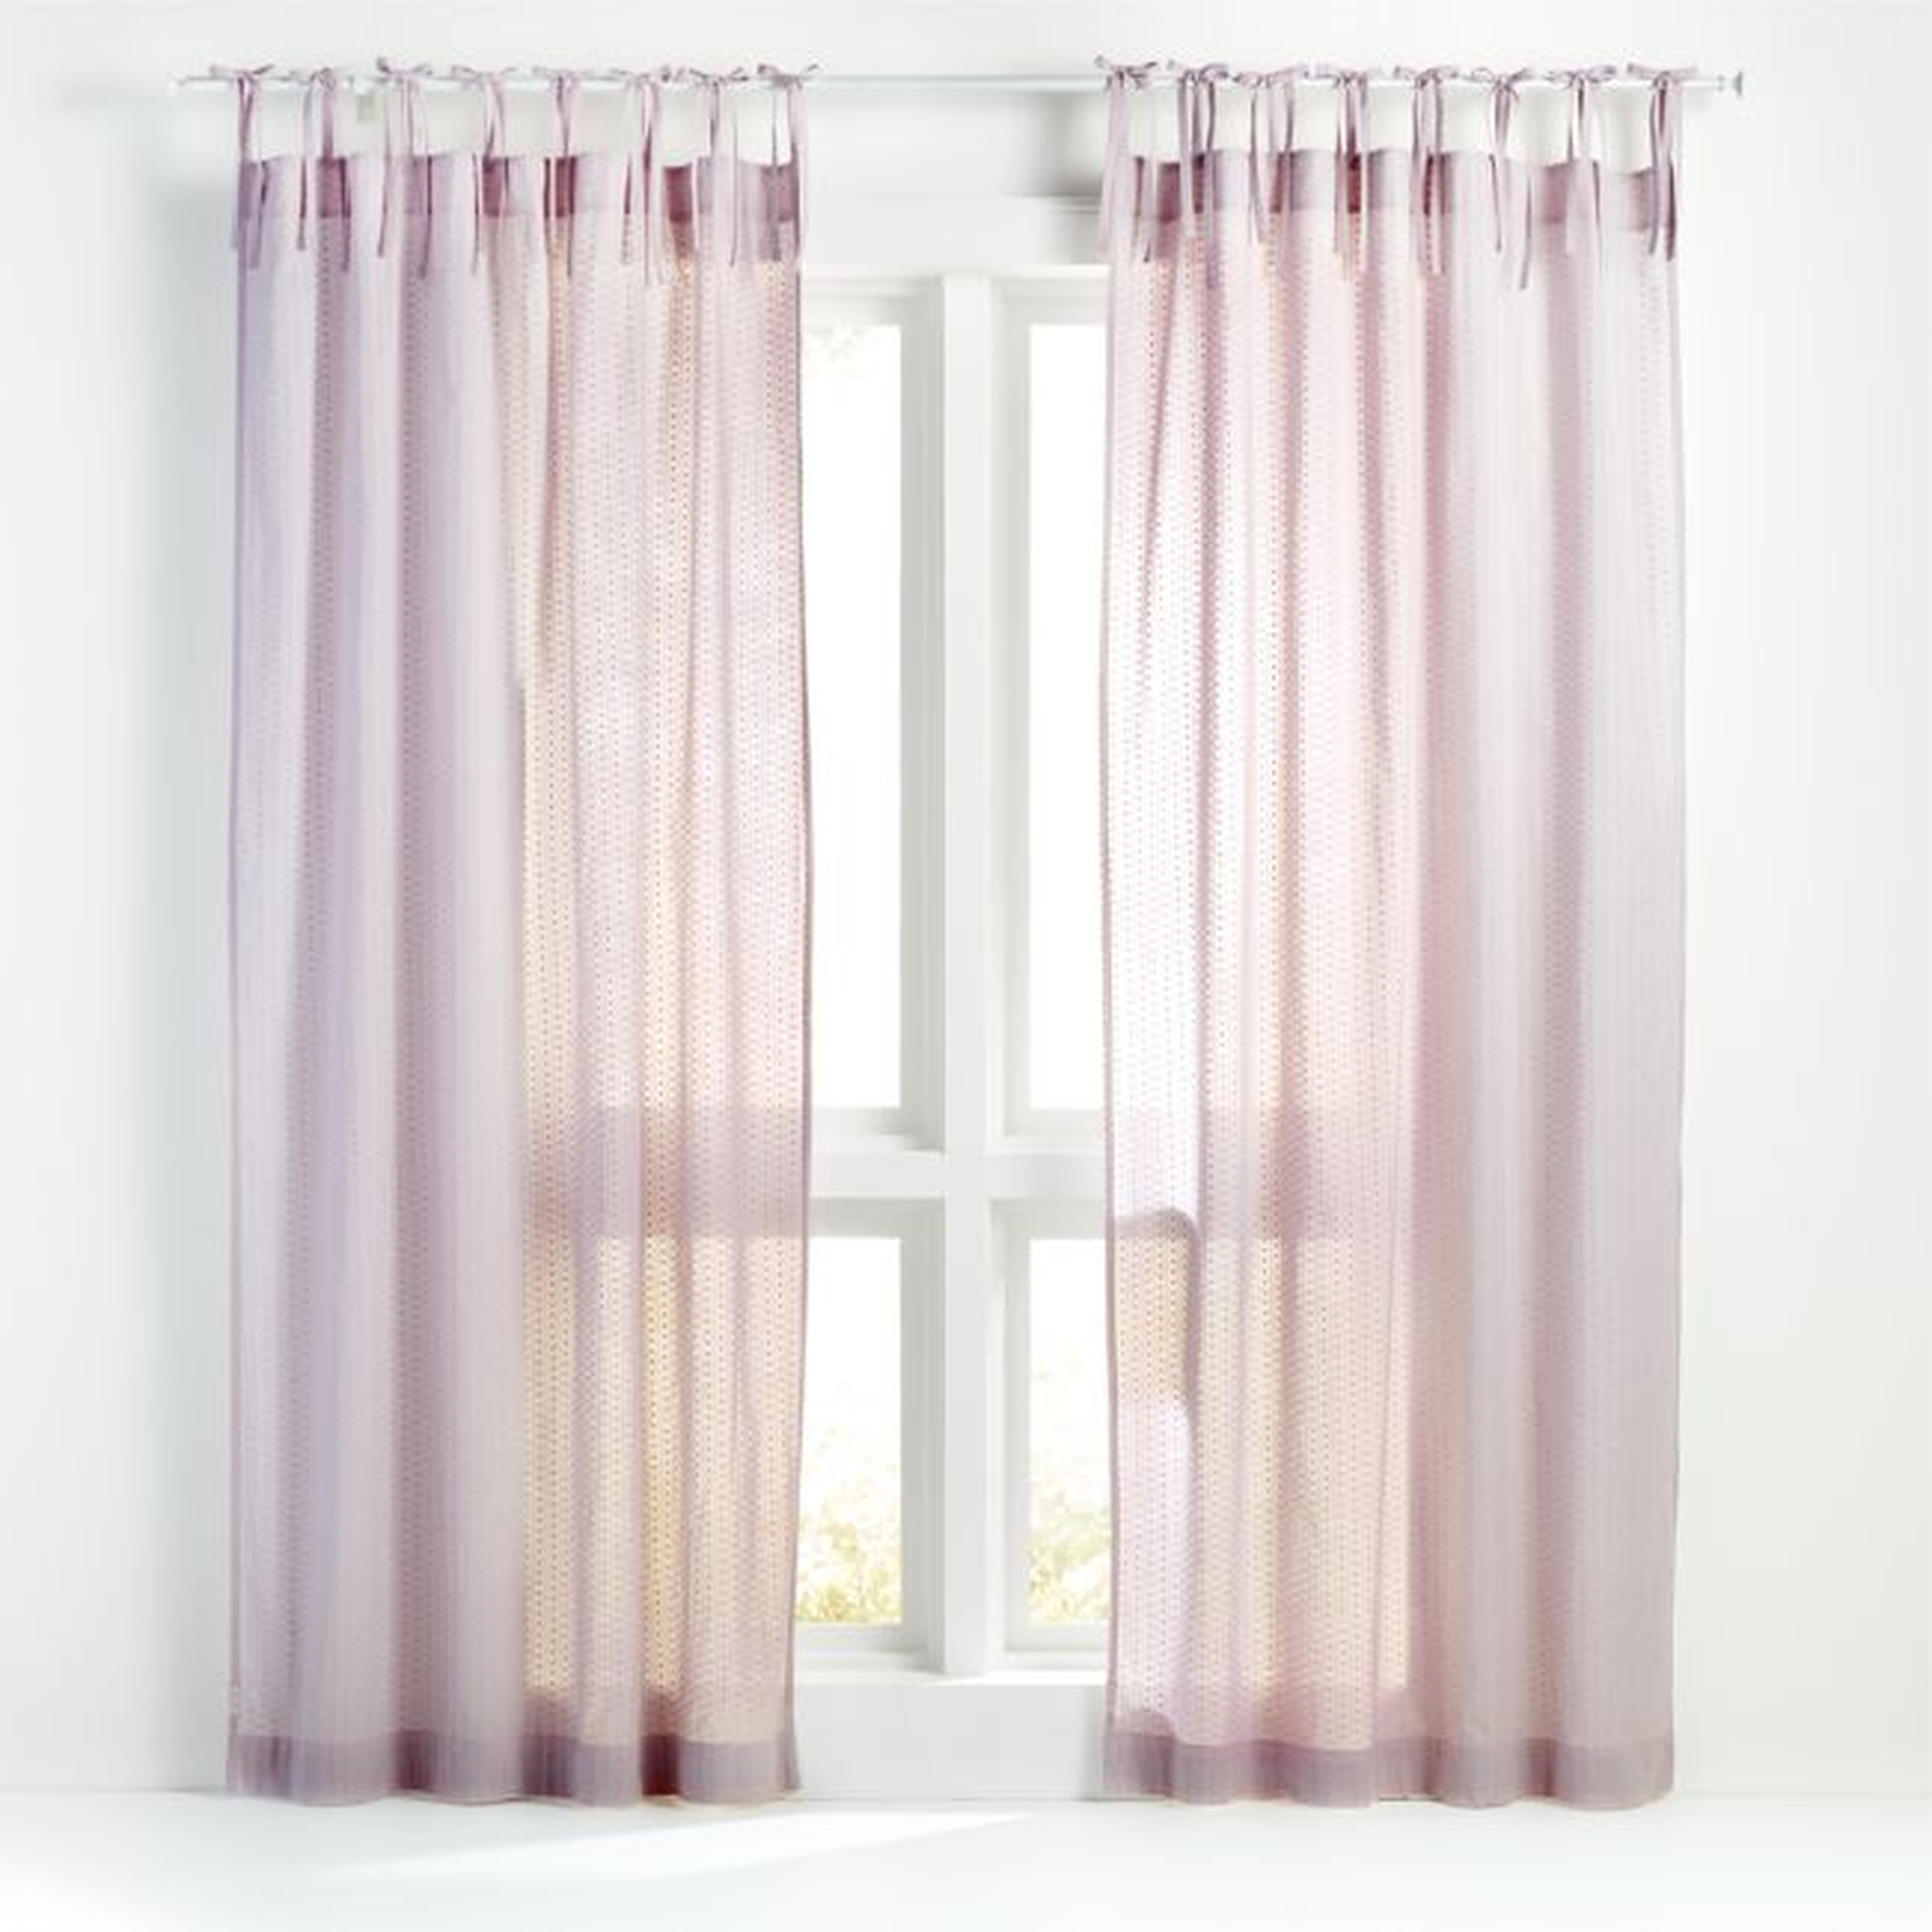 63" Sheer Dobby Lilac Curtain Panel - Crate and Barrel